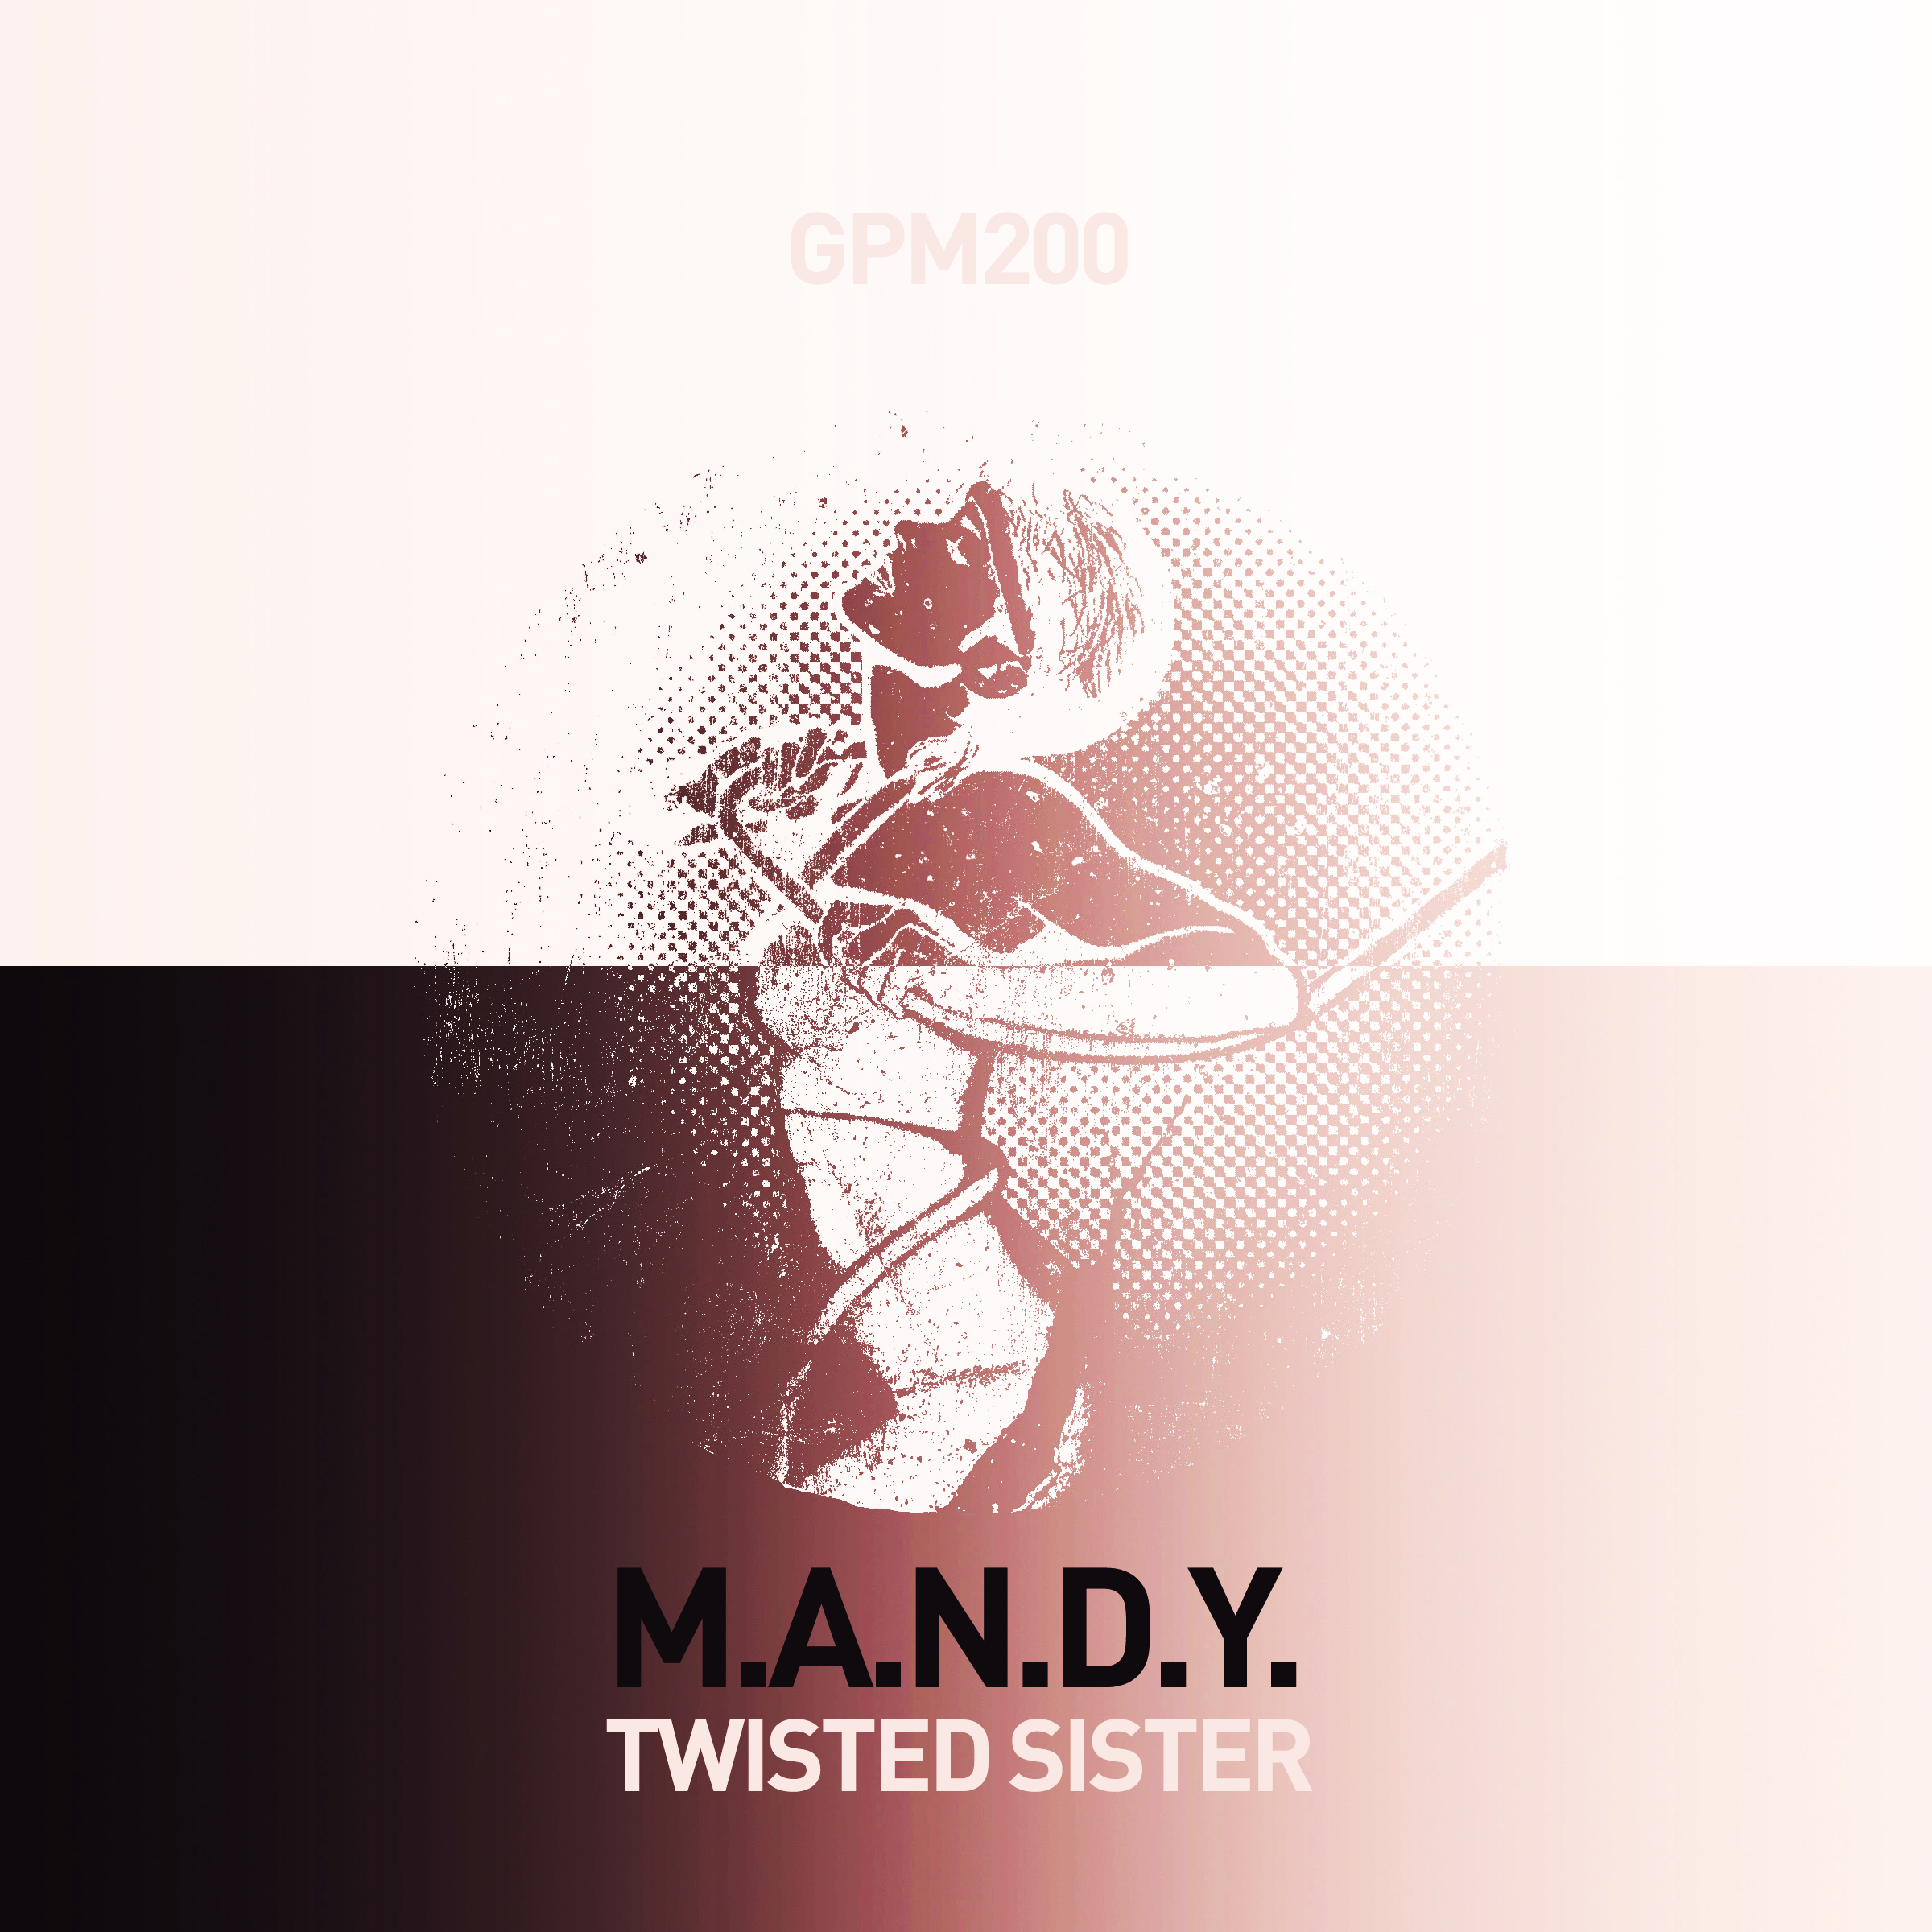 MANDY - Twisted sister EP